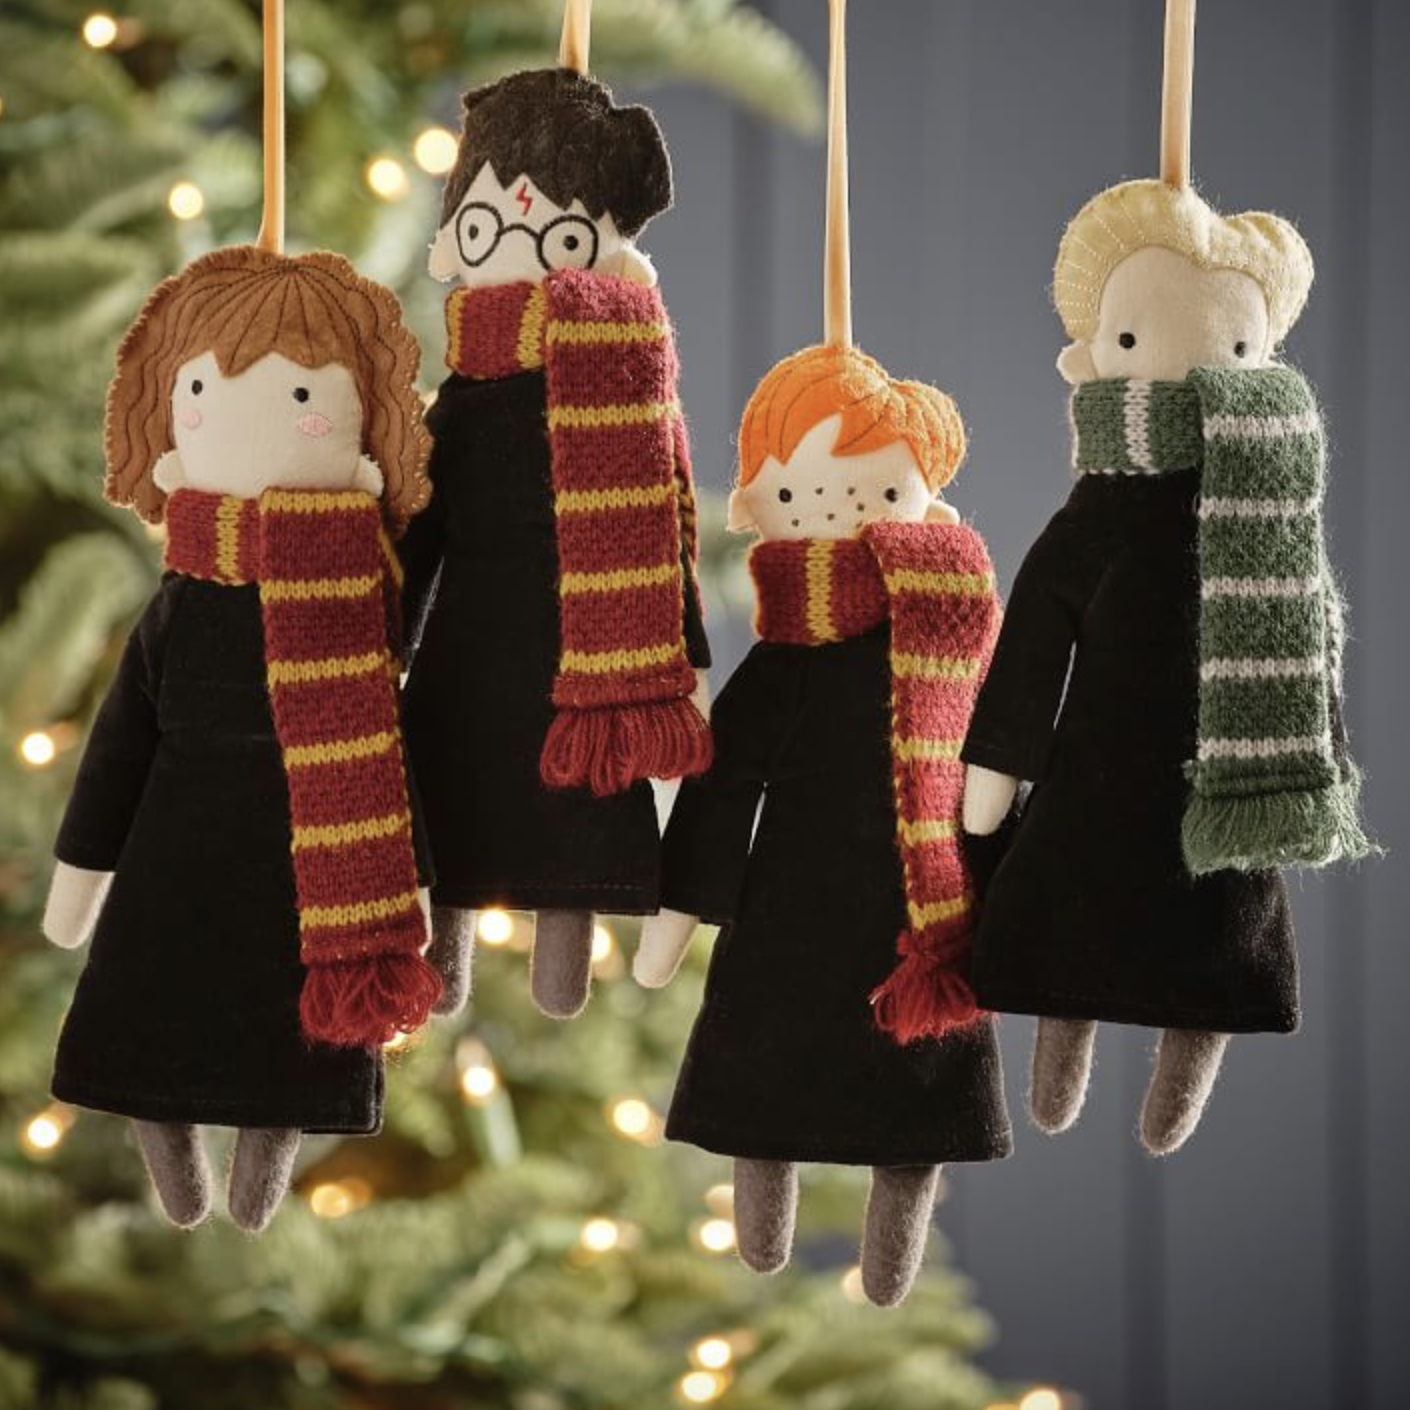 20 Best Harry Potter Ornaments to Help Celebrate Christmas